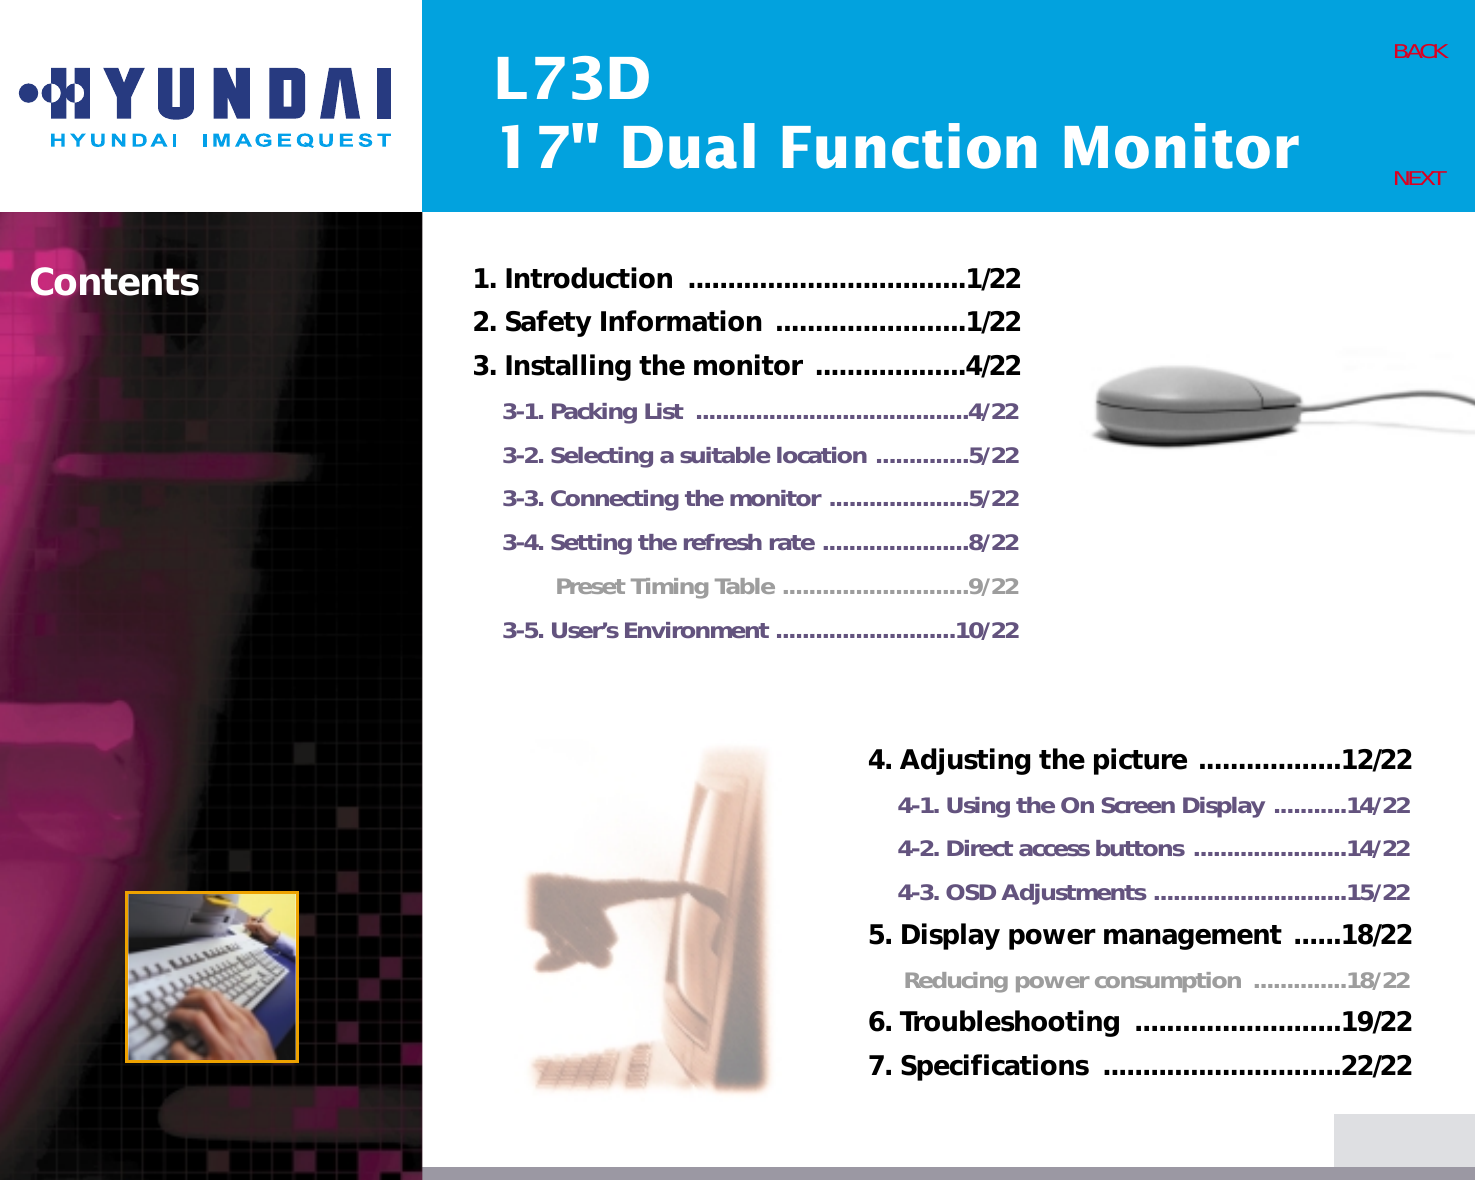 L73D17&quot; Dual Function MonitorContents 1. Introduction  ...................................1/222. Safety Information ........................1/223. Installing the monitor ...................4/223-1. Packing List  .........................................4/223-2. Selecting a suitable location ..............5/223-3. Connecting the monitor .....................5/223-4. Setting the refresh rate ......................8/22Preset Timing Table ............................9/223-5. User’s Environment ...........................10/22BACKNEXT4. Adjusting the picture ..................12/224-1. Using the On Screen Display ...........14/224-2. Direct access buttons .......................14/224-3. OSD Adjustments .............................15/225. Display power management ......18/22Reducing power consumption  ..............18/226. Troubleshooting  ..........................19/227. Specifications  ..............................22/22